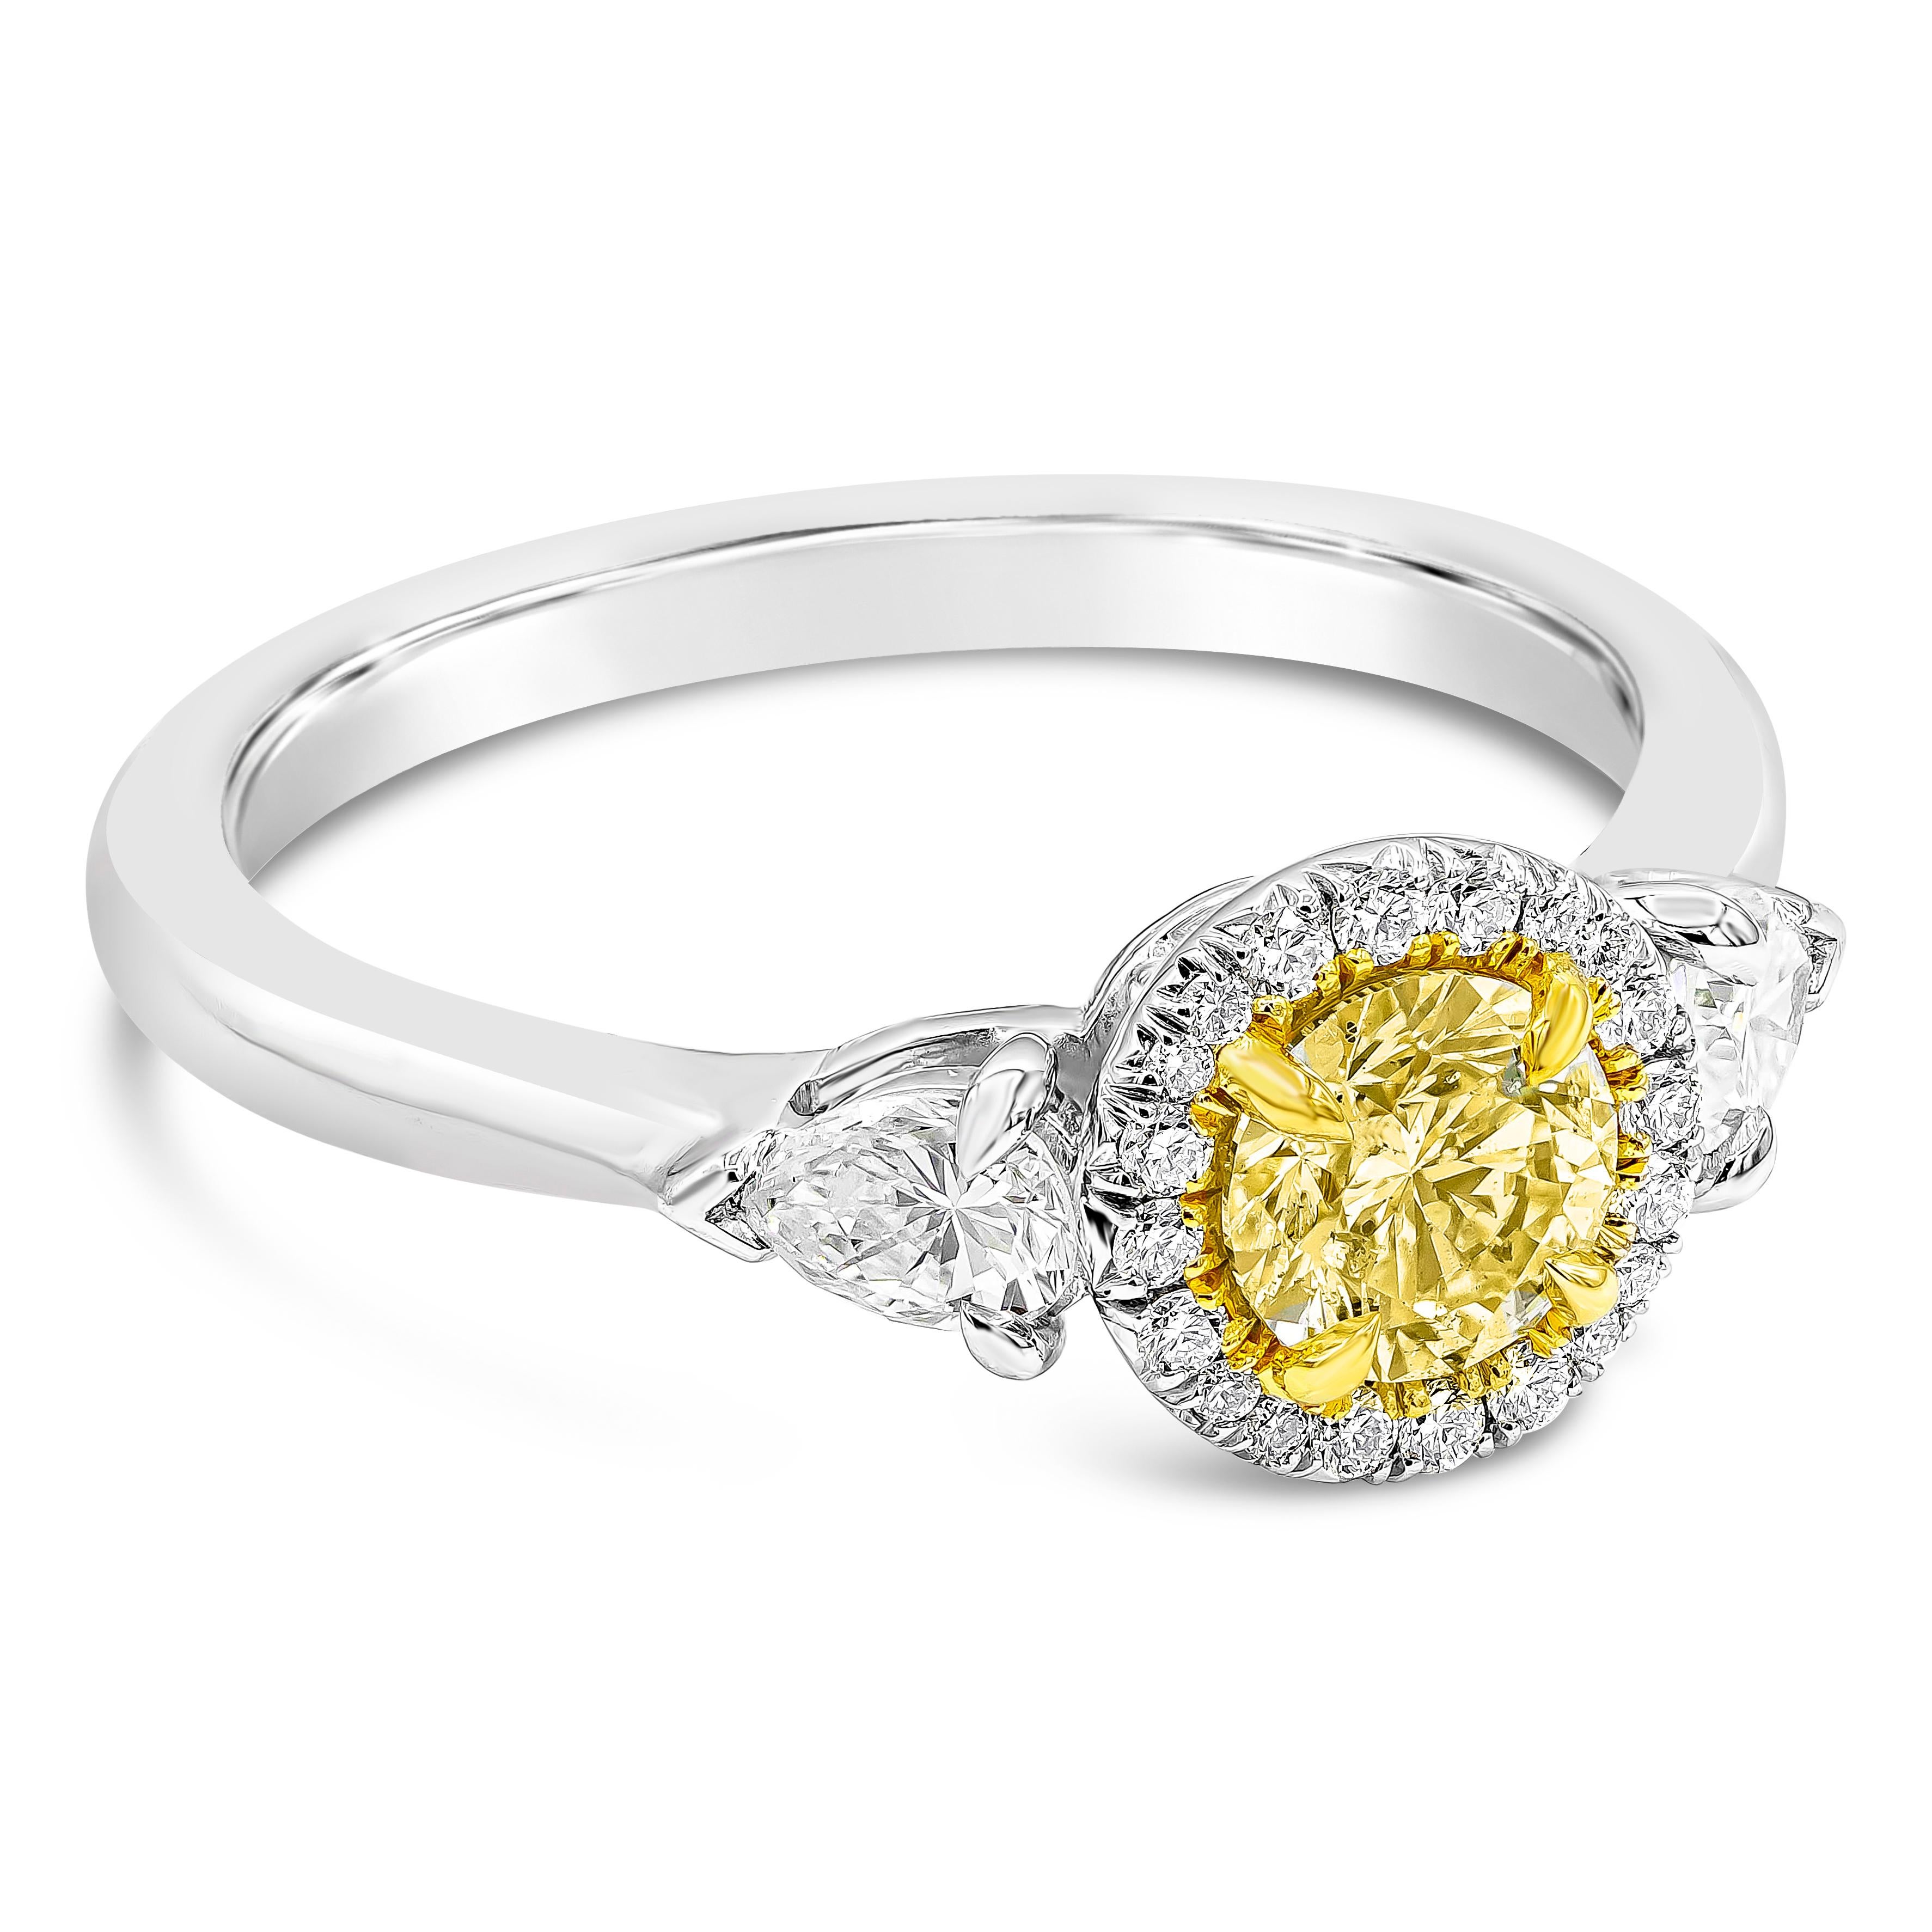 A beautiful engagement ring style, showcasing a 0.50 carat round brilliant cut diamond certified by GIA as Fancy Light Yellowish Green color, set on platinum. The center diamond is surrounded by round brilliant diamonds, flanked by a pear shape